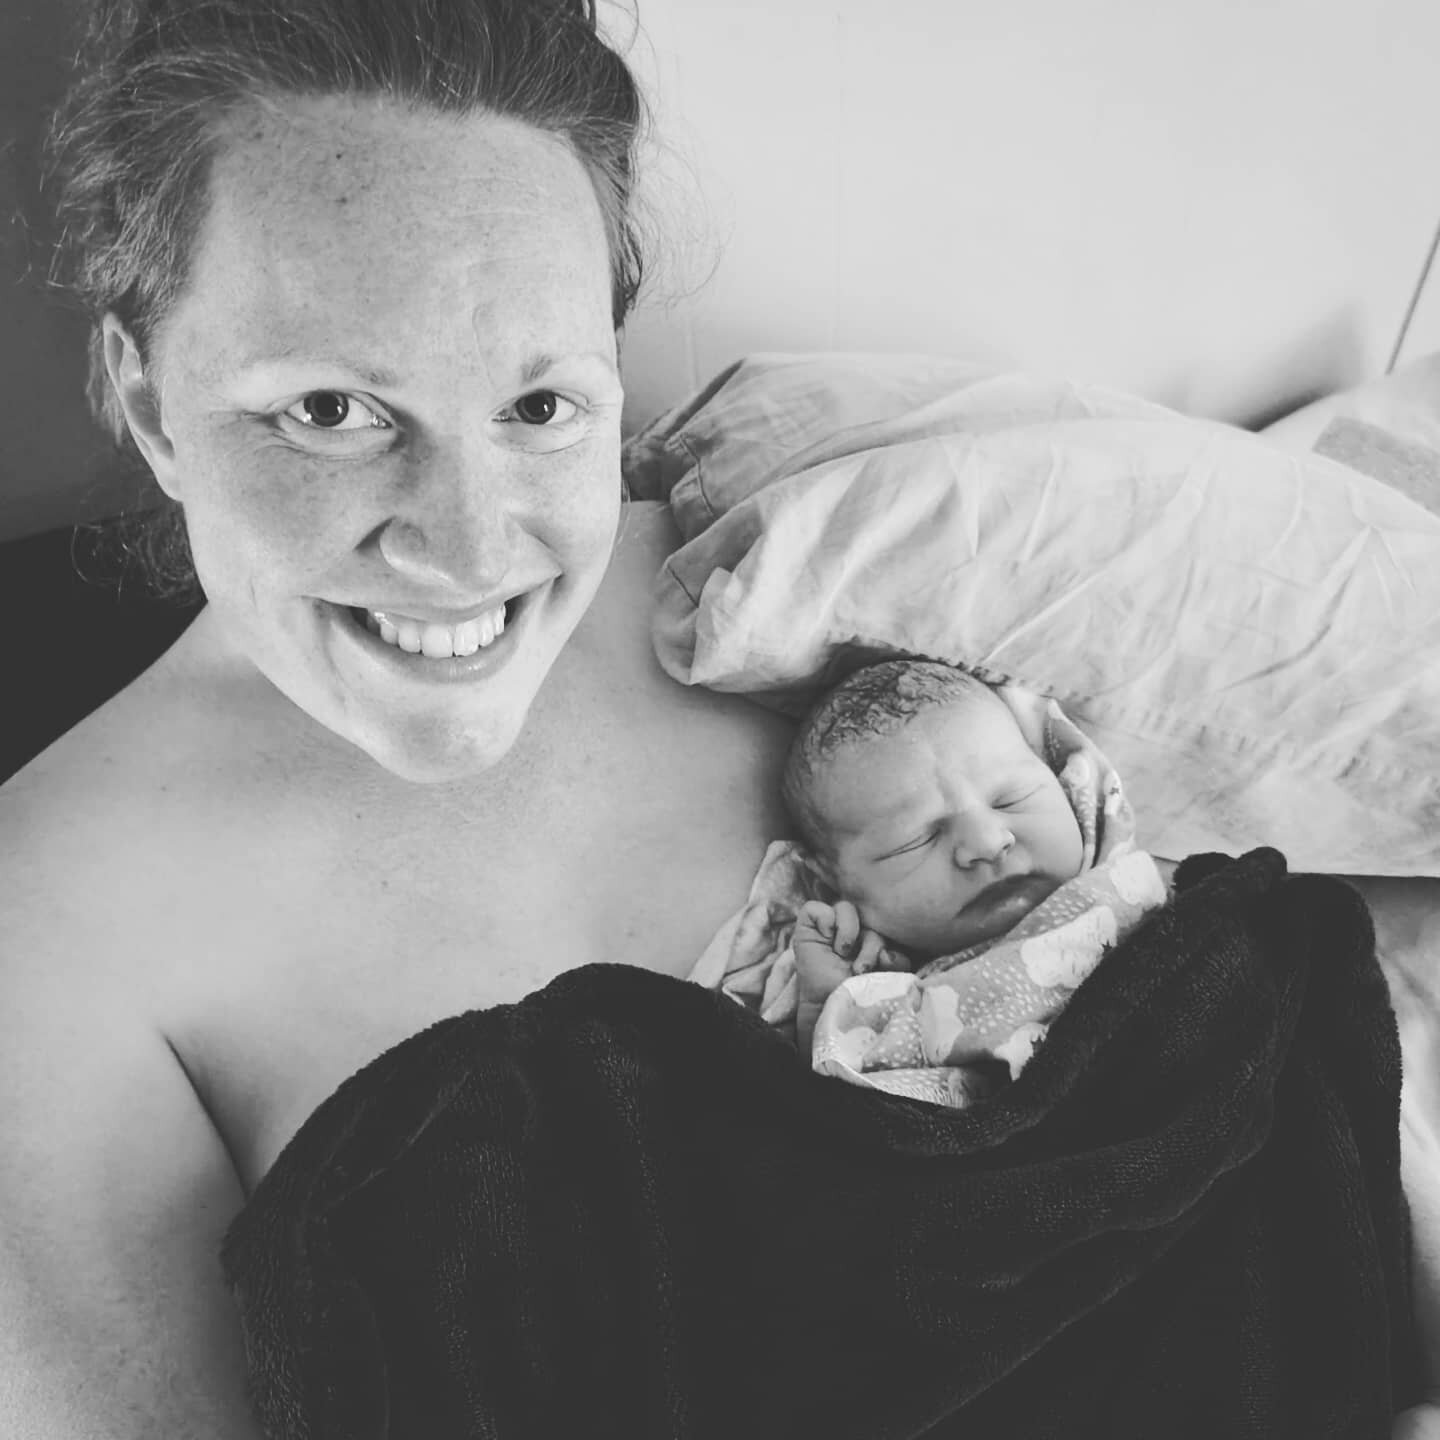 My daughter Lucy joined us earthside 6 weeks ago. Her birth was beautiful. It had so many moments of joy and lightness while also teaching me a new deeper surrender to the decimating power of birth. I find myself completely new again, reborn as a wom